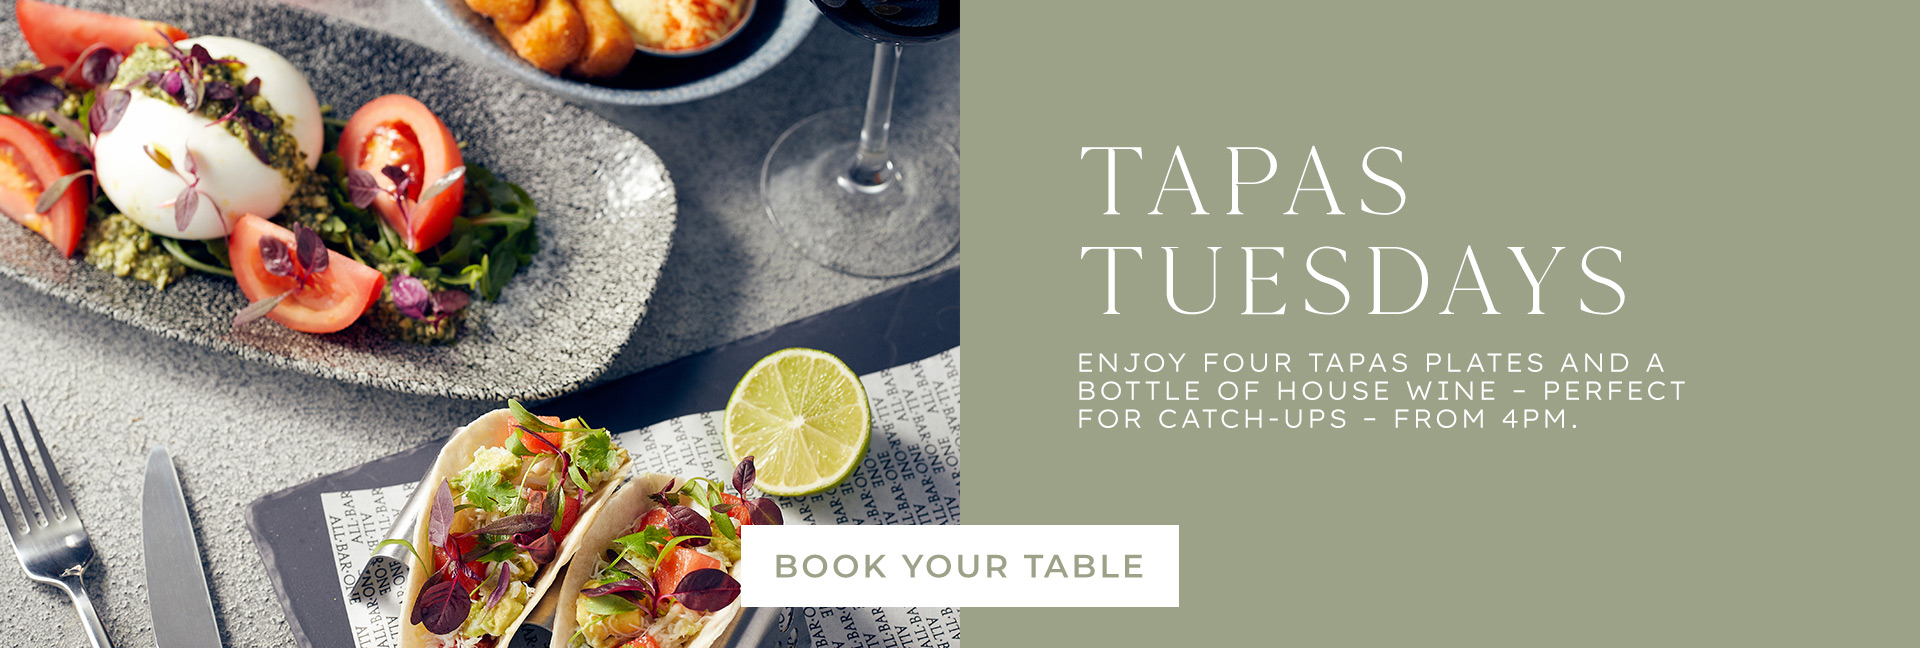 Tapas Tuesday at All Bar One Leicester Square - Book now